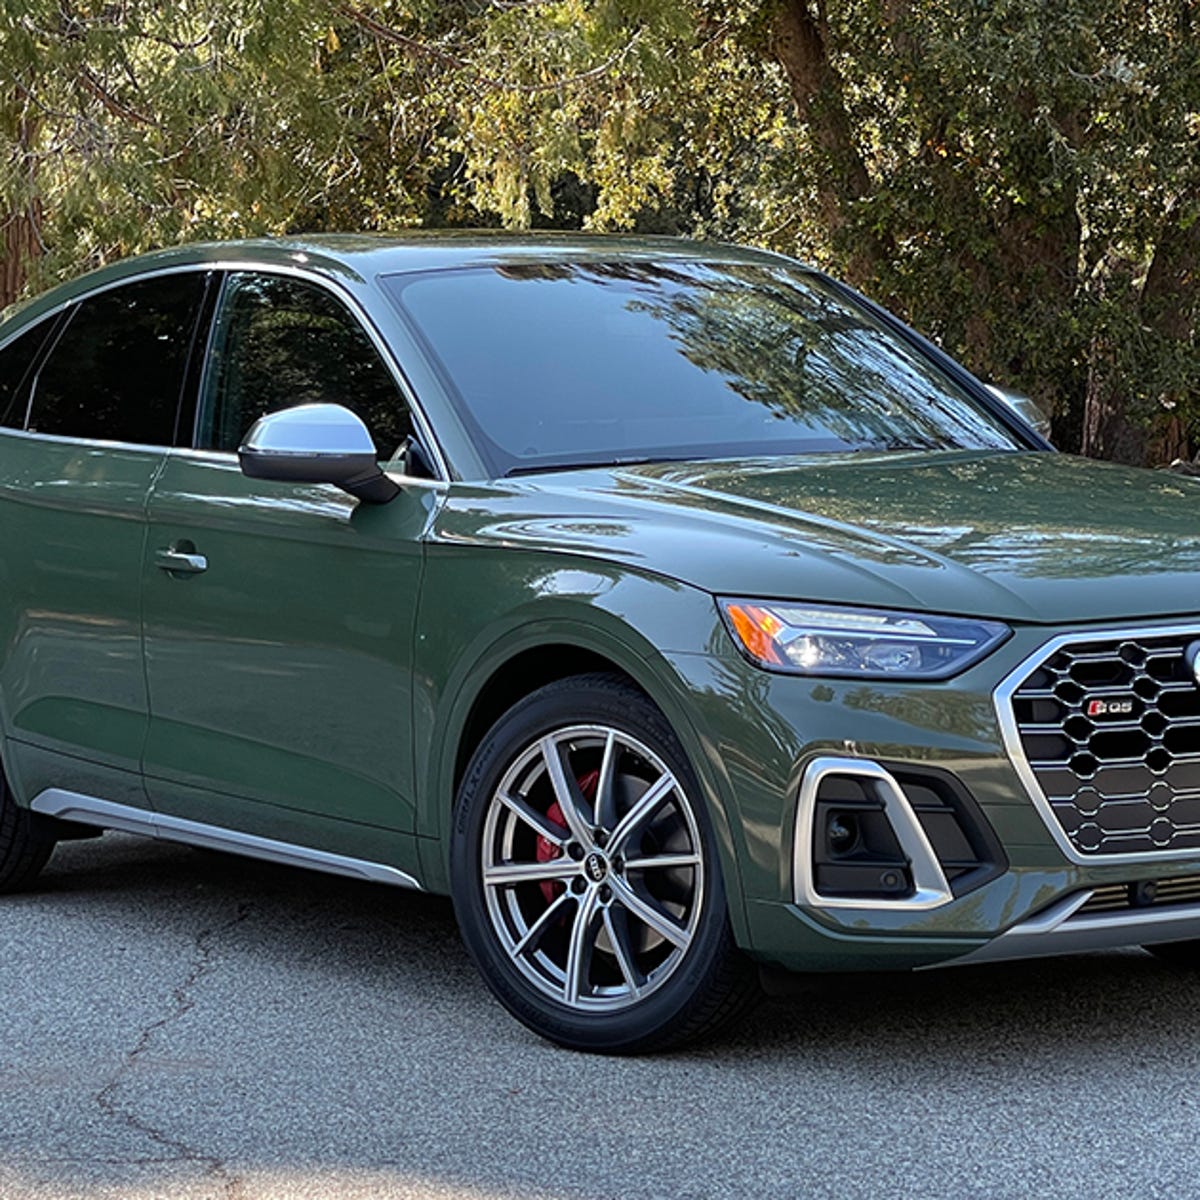 2022 Audi SQ5 Sportback review: Not compromised enough - CNET